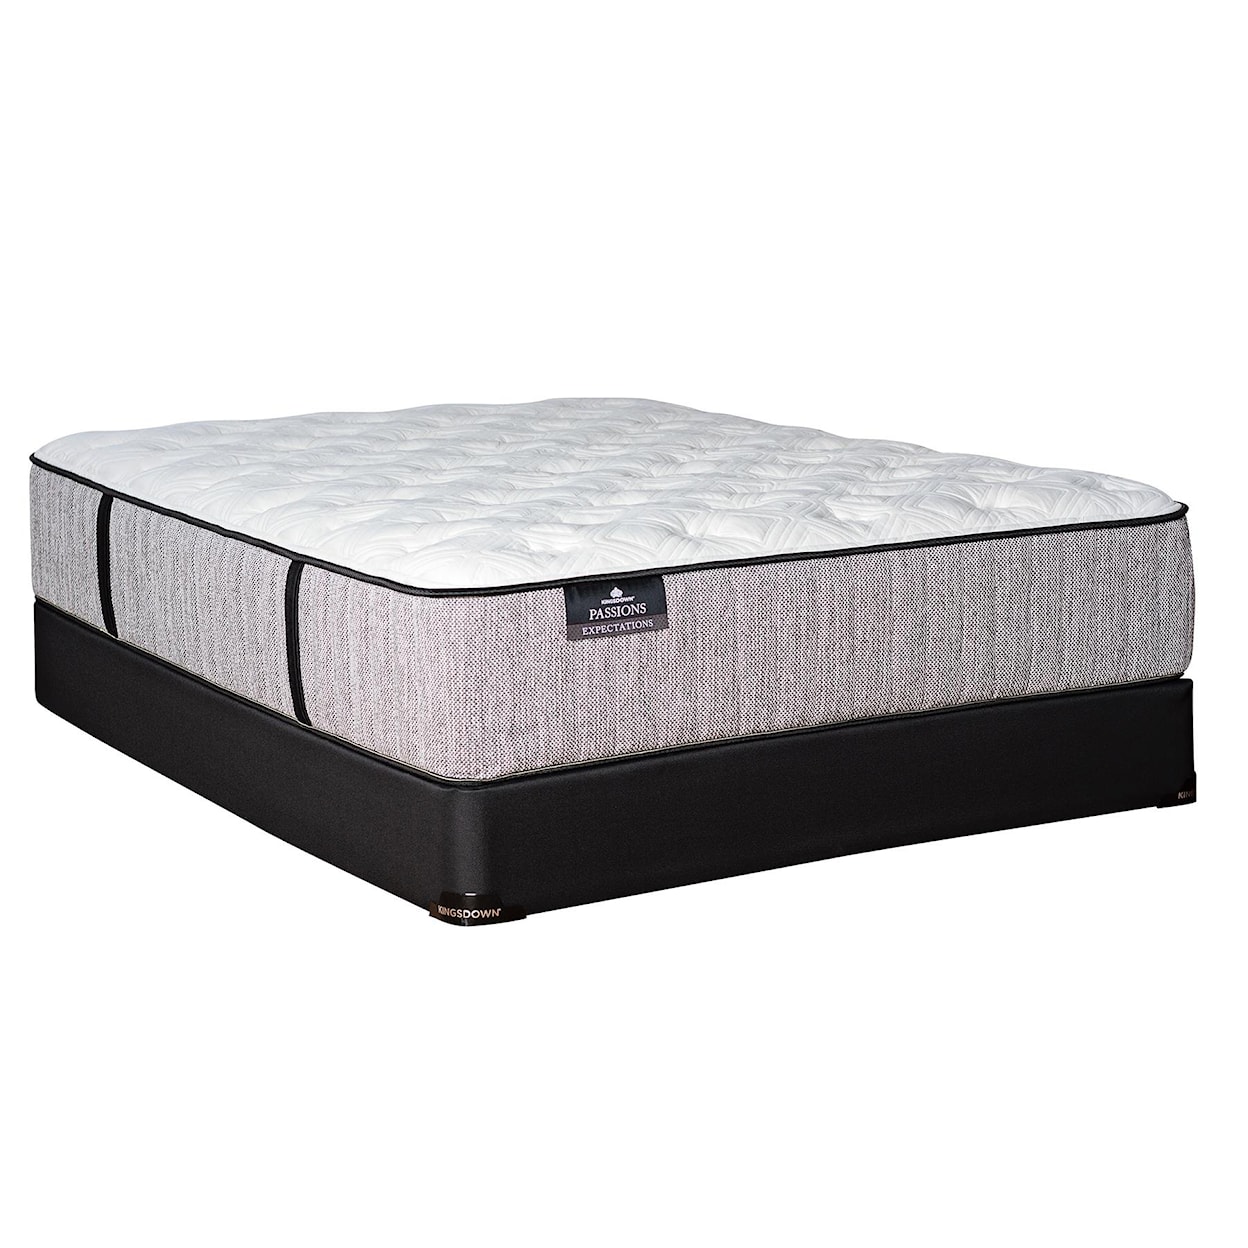 Kingsdown Passions Expectations Queen Plush Mattress with Gel Memory Foam